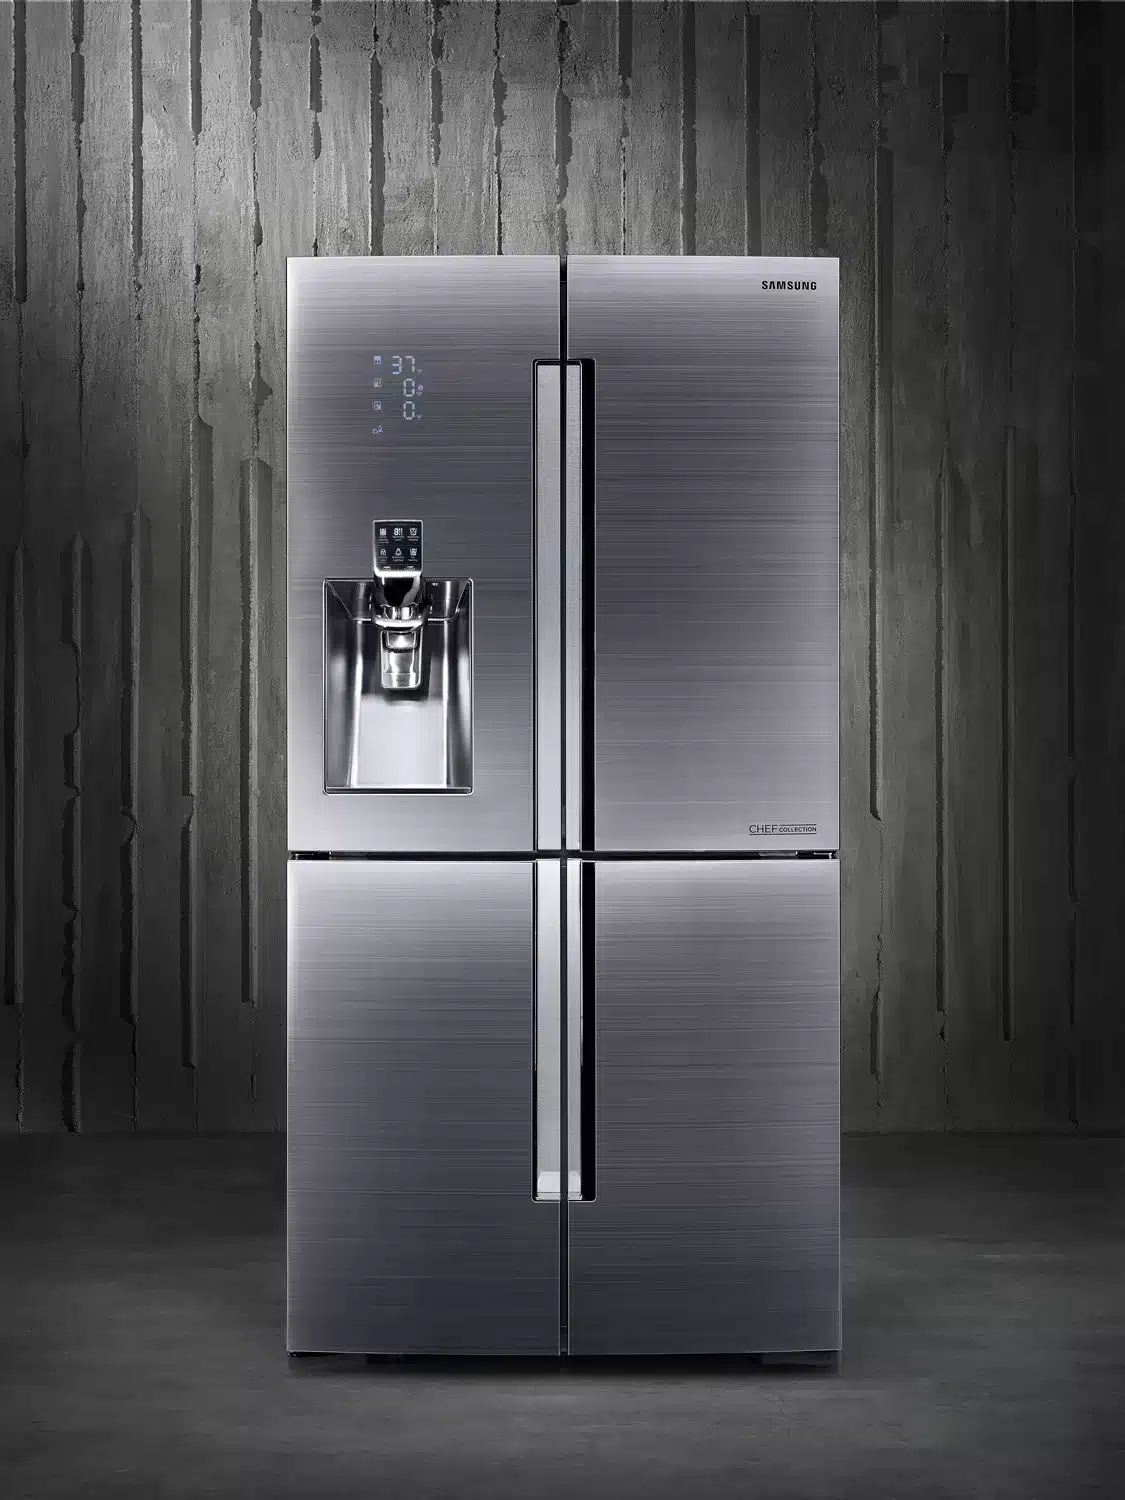 eco-friendly-what-does-energy-saver-do-on-a-samsung-fridge